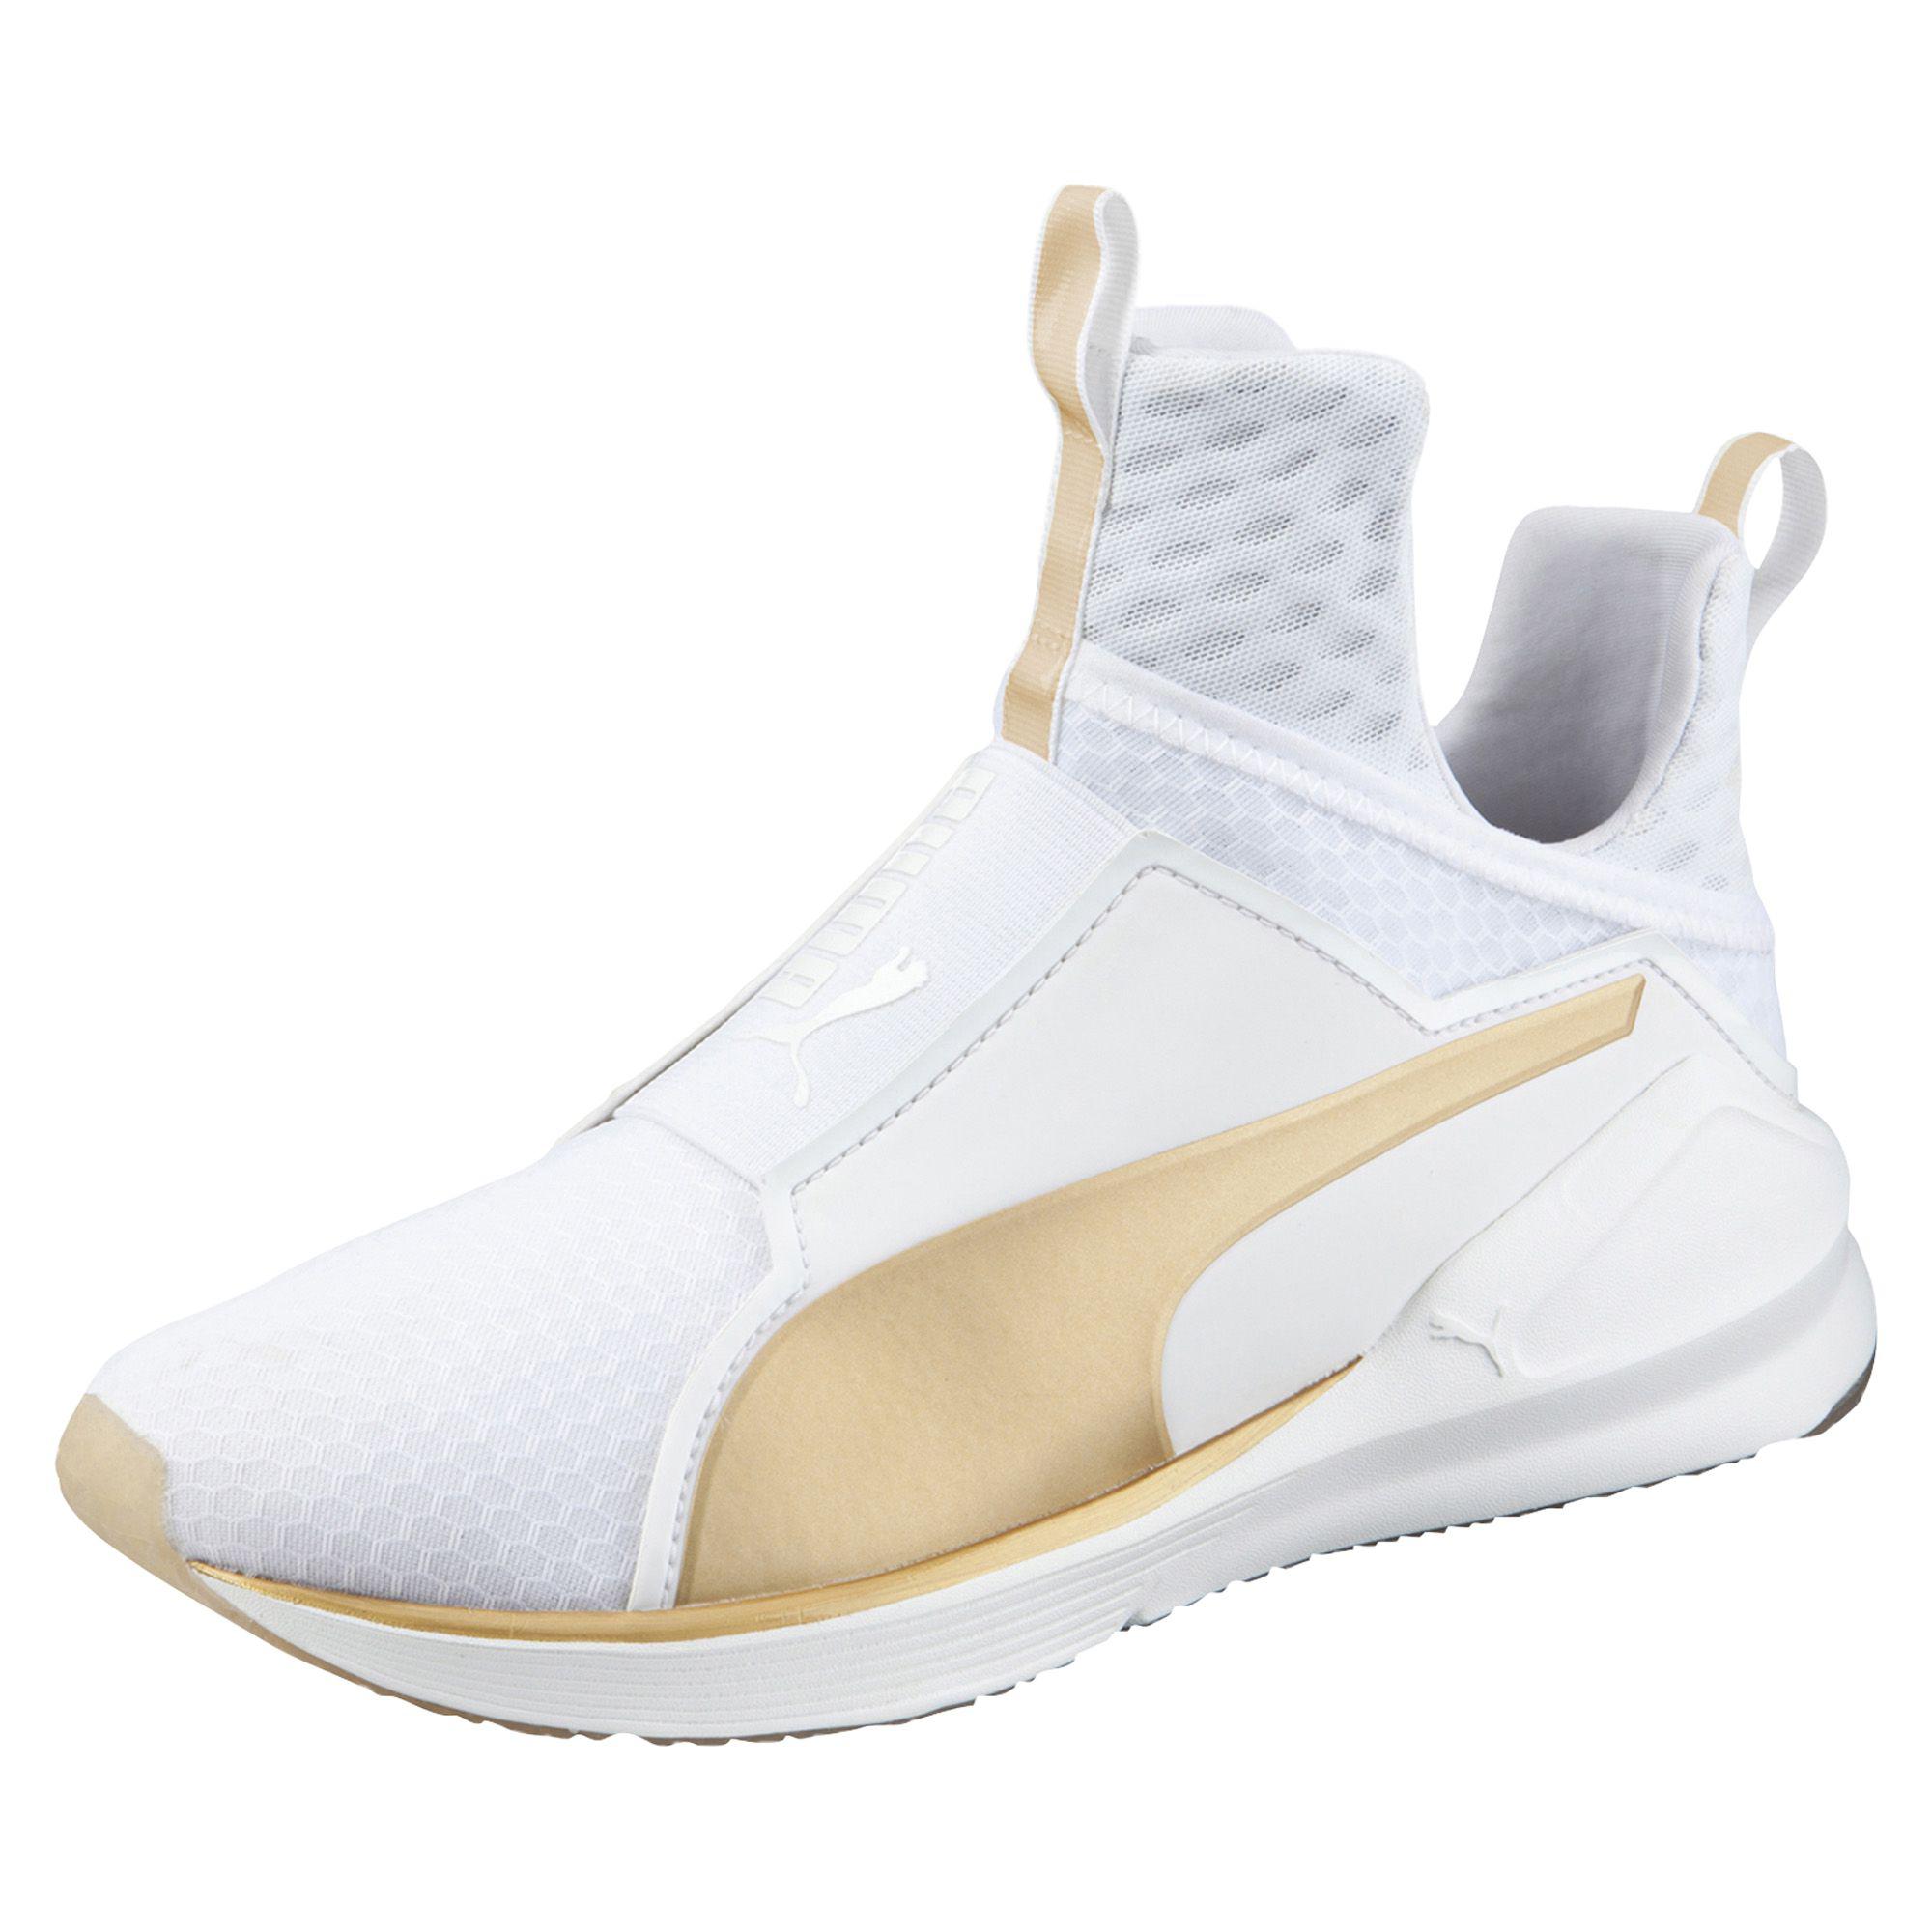 white and gold pumas with strap